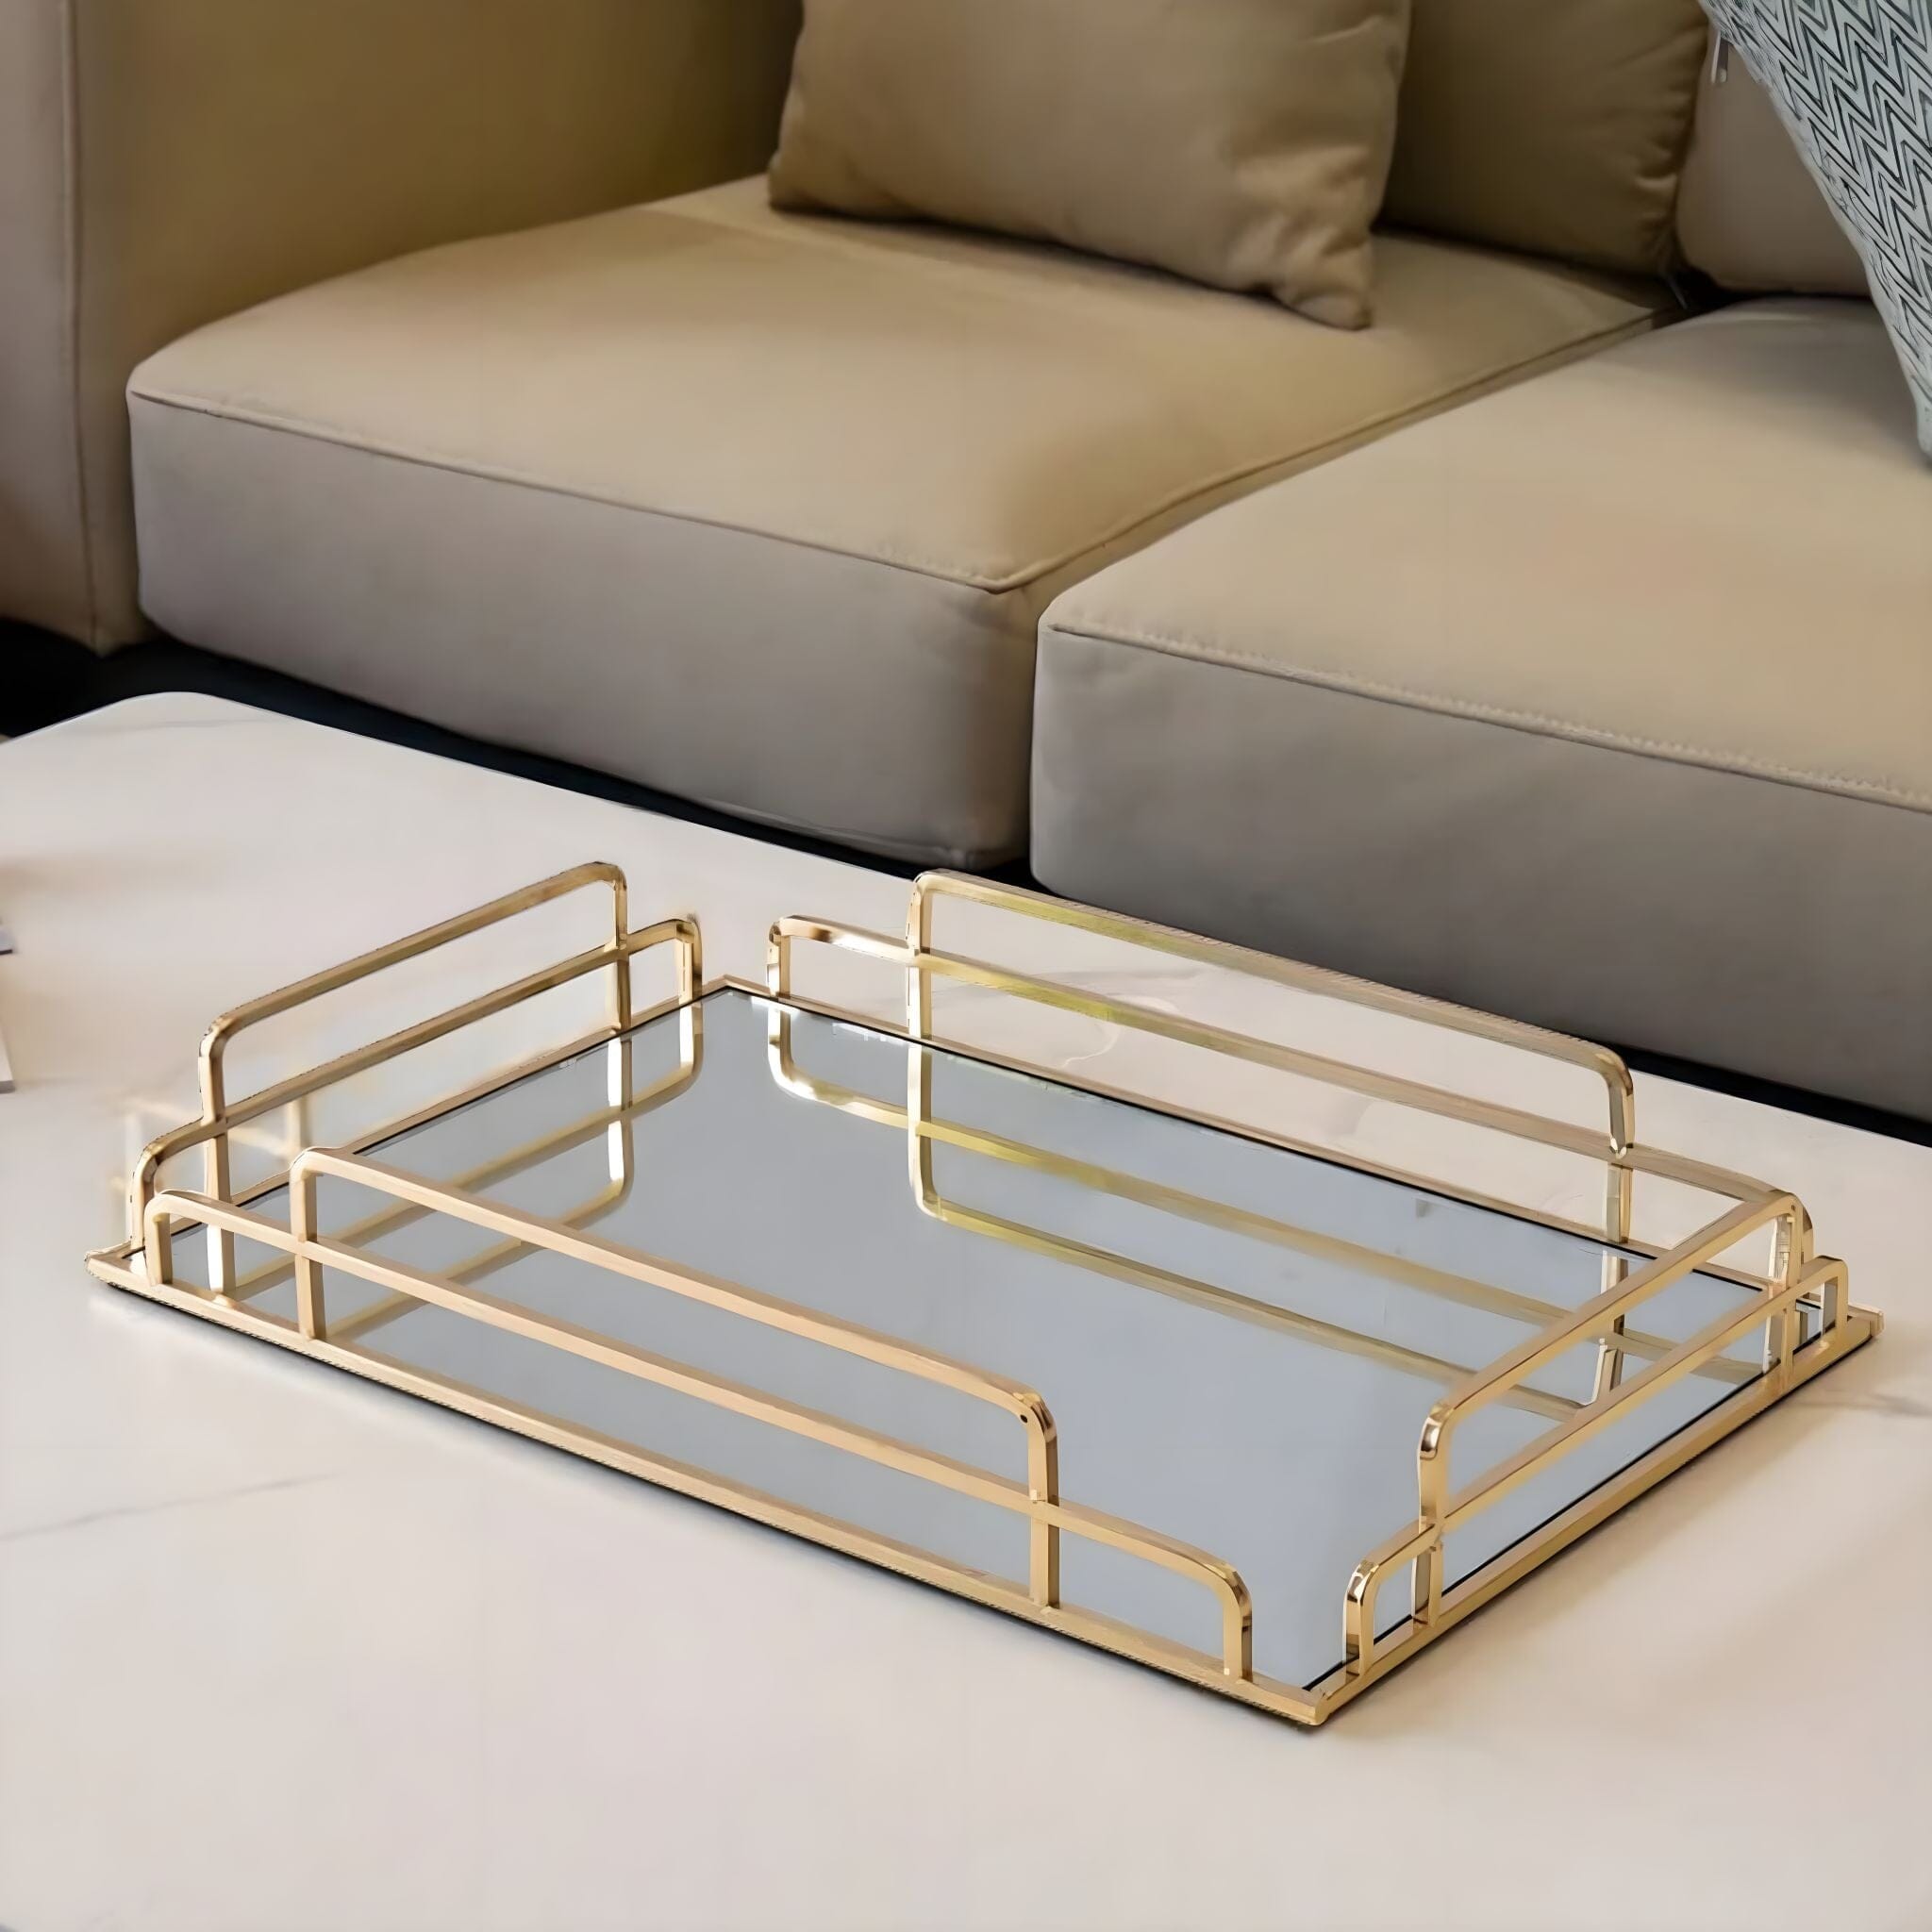 Golden Serving Tray Decorative Trays 34 x 20cm Gold 